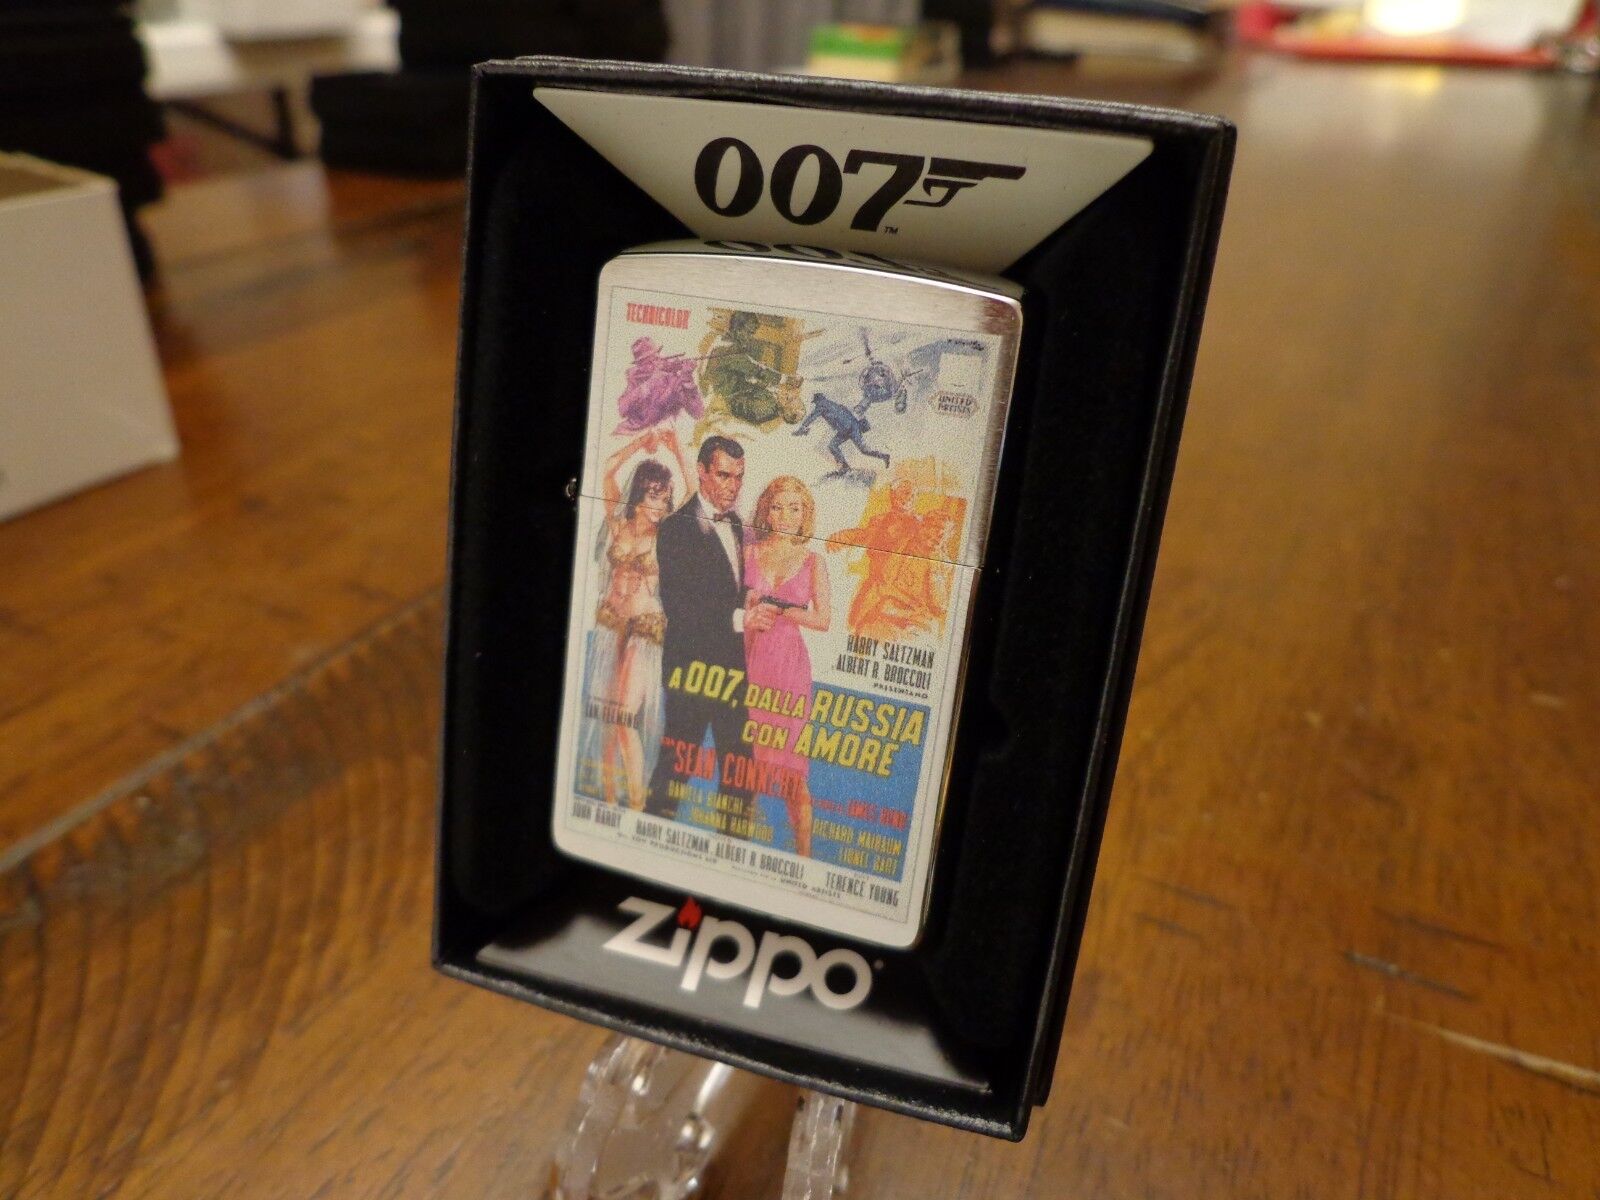 JAMES BOND 007 DALLA RUSSIA CON AMORE MOVIE POSTER ZIPPO FROM RUSSIA WITH LOVE. Available Now for 32.95